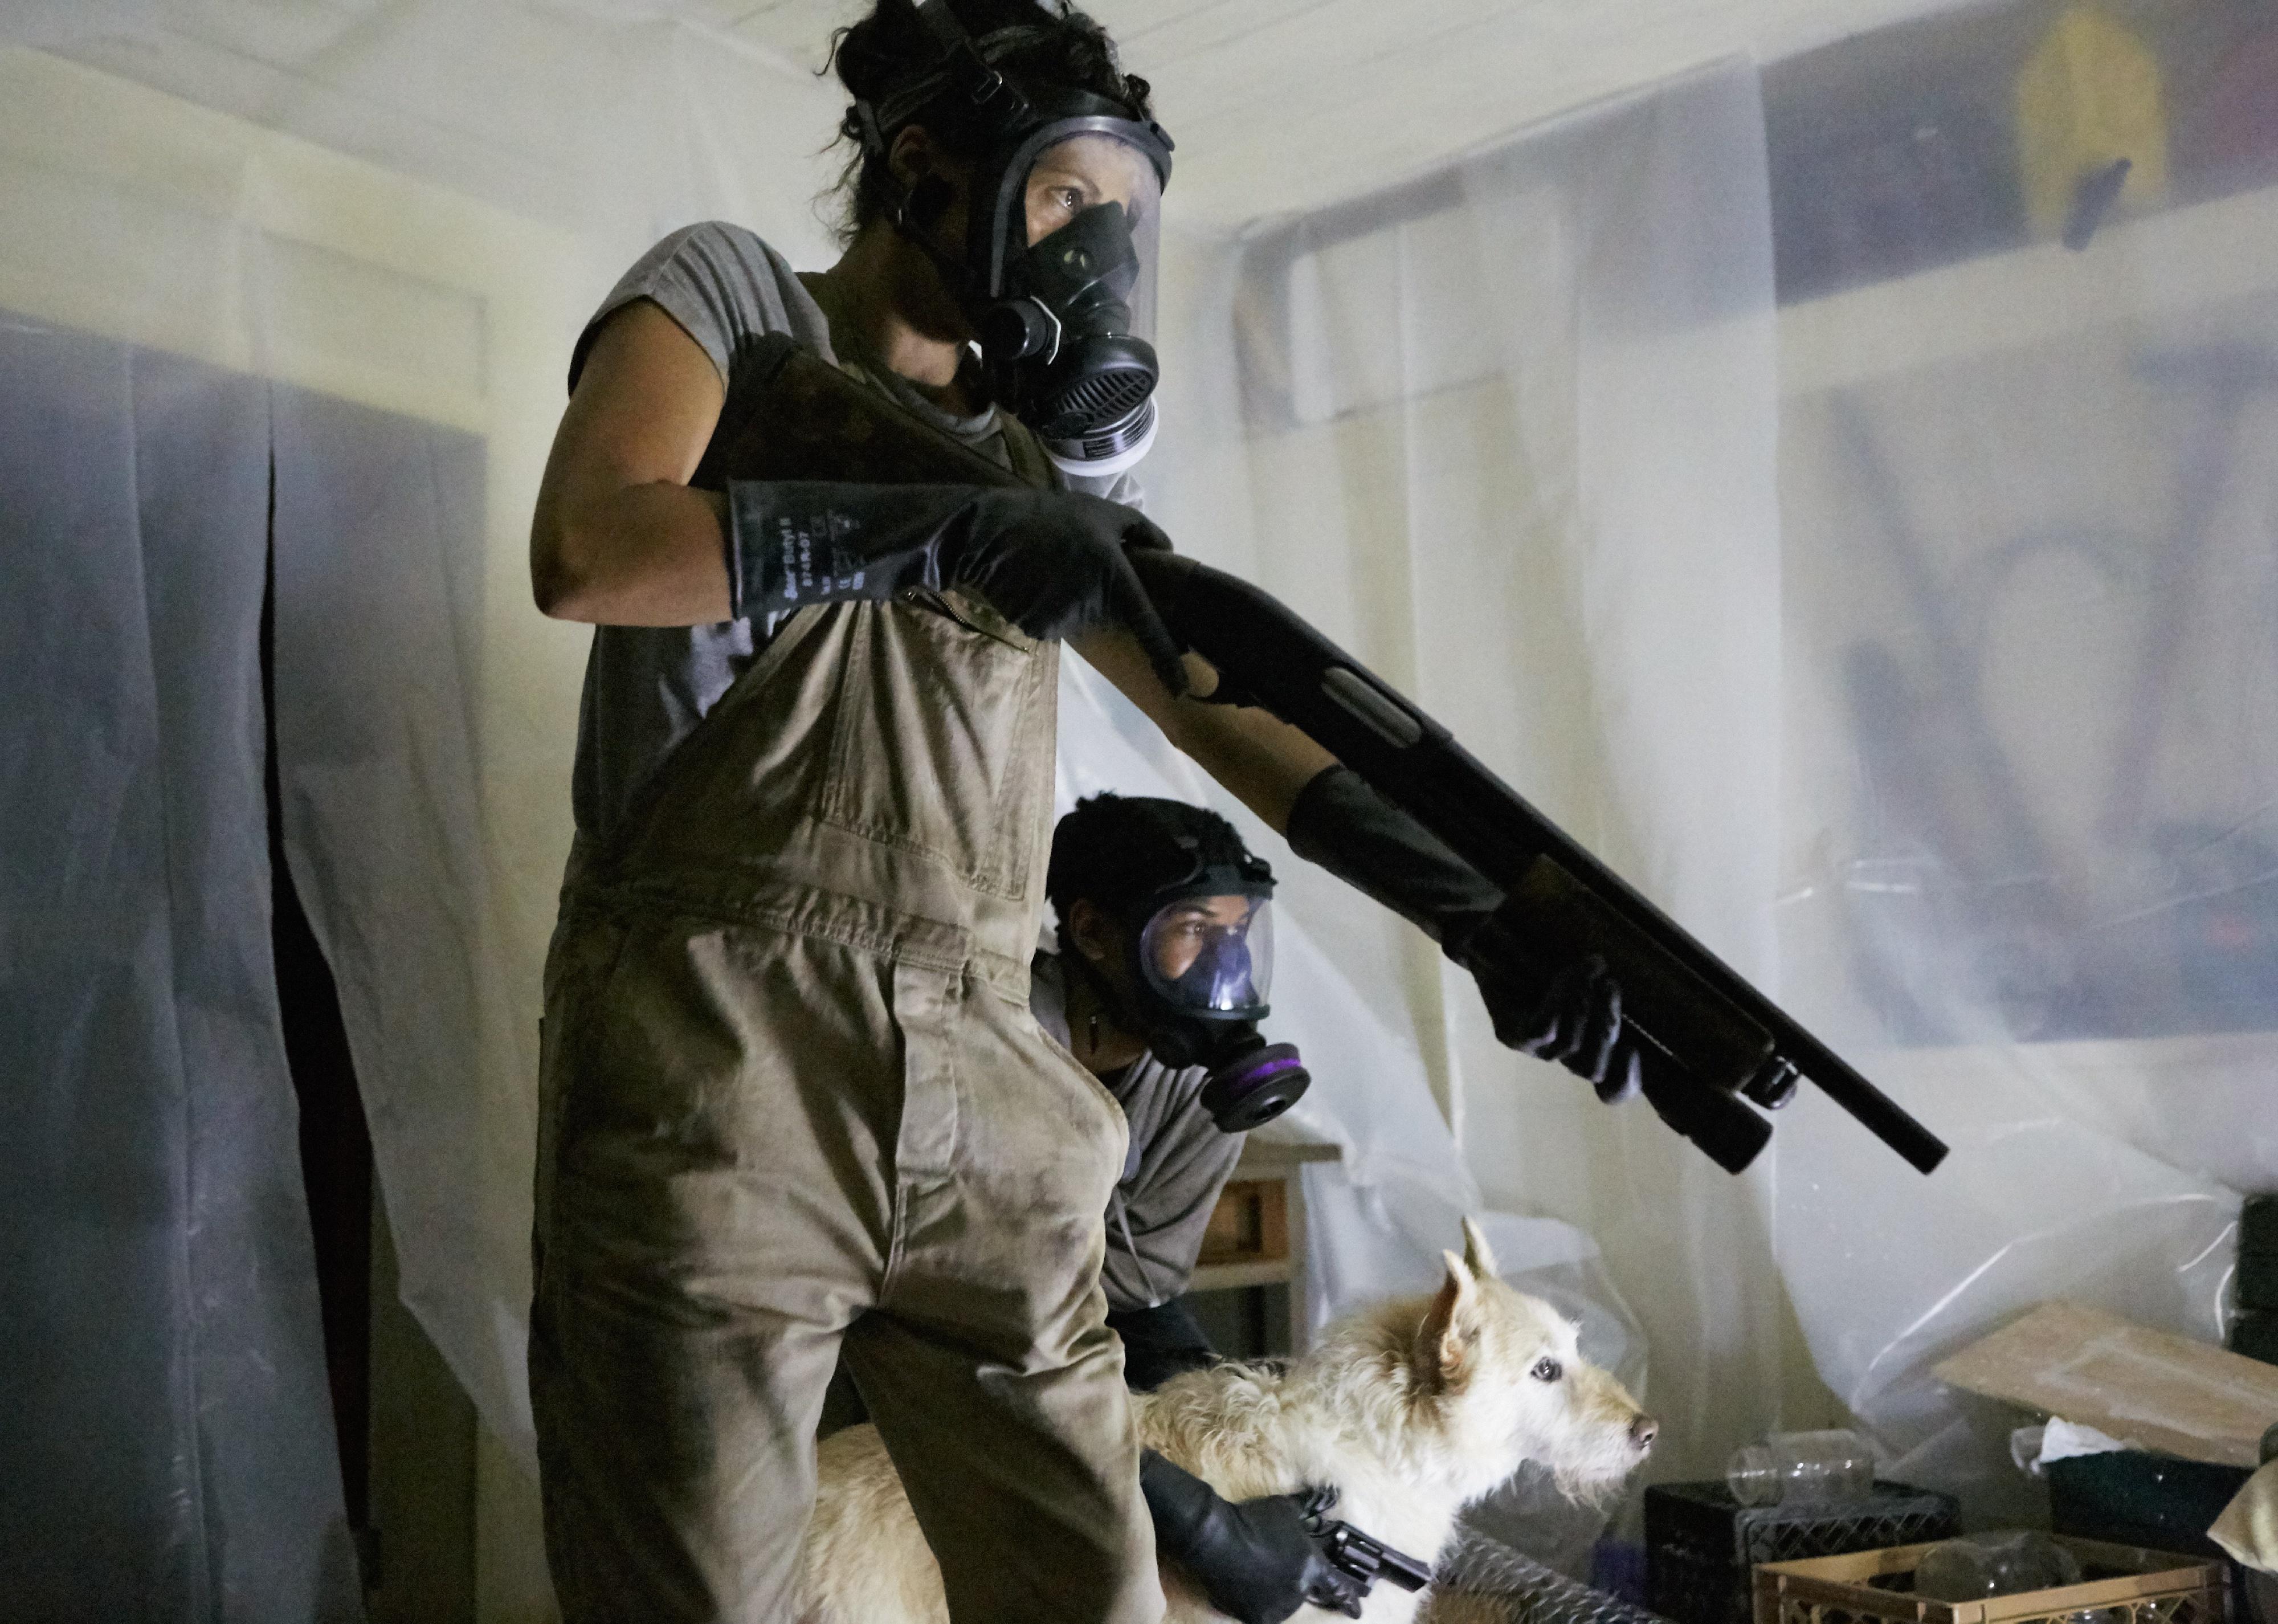 Two women and a dog in a plastic covered room pointing guns while wearing gas masks.